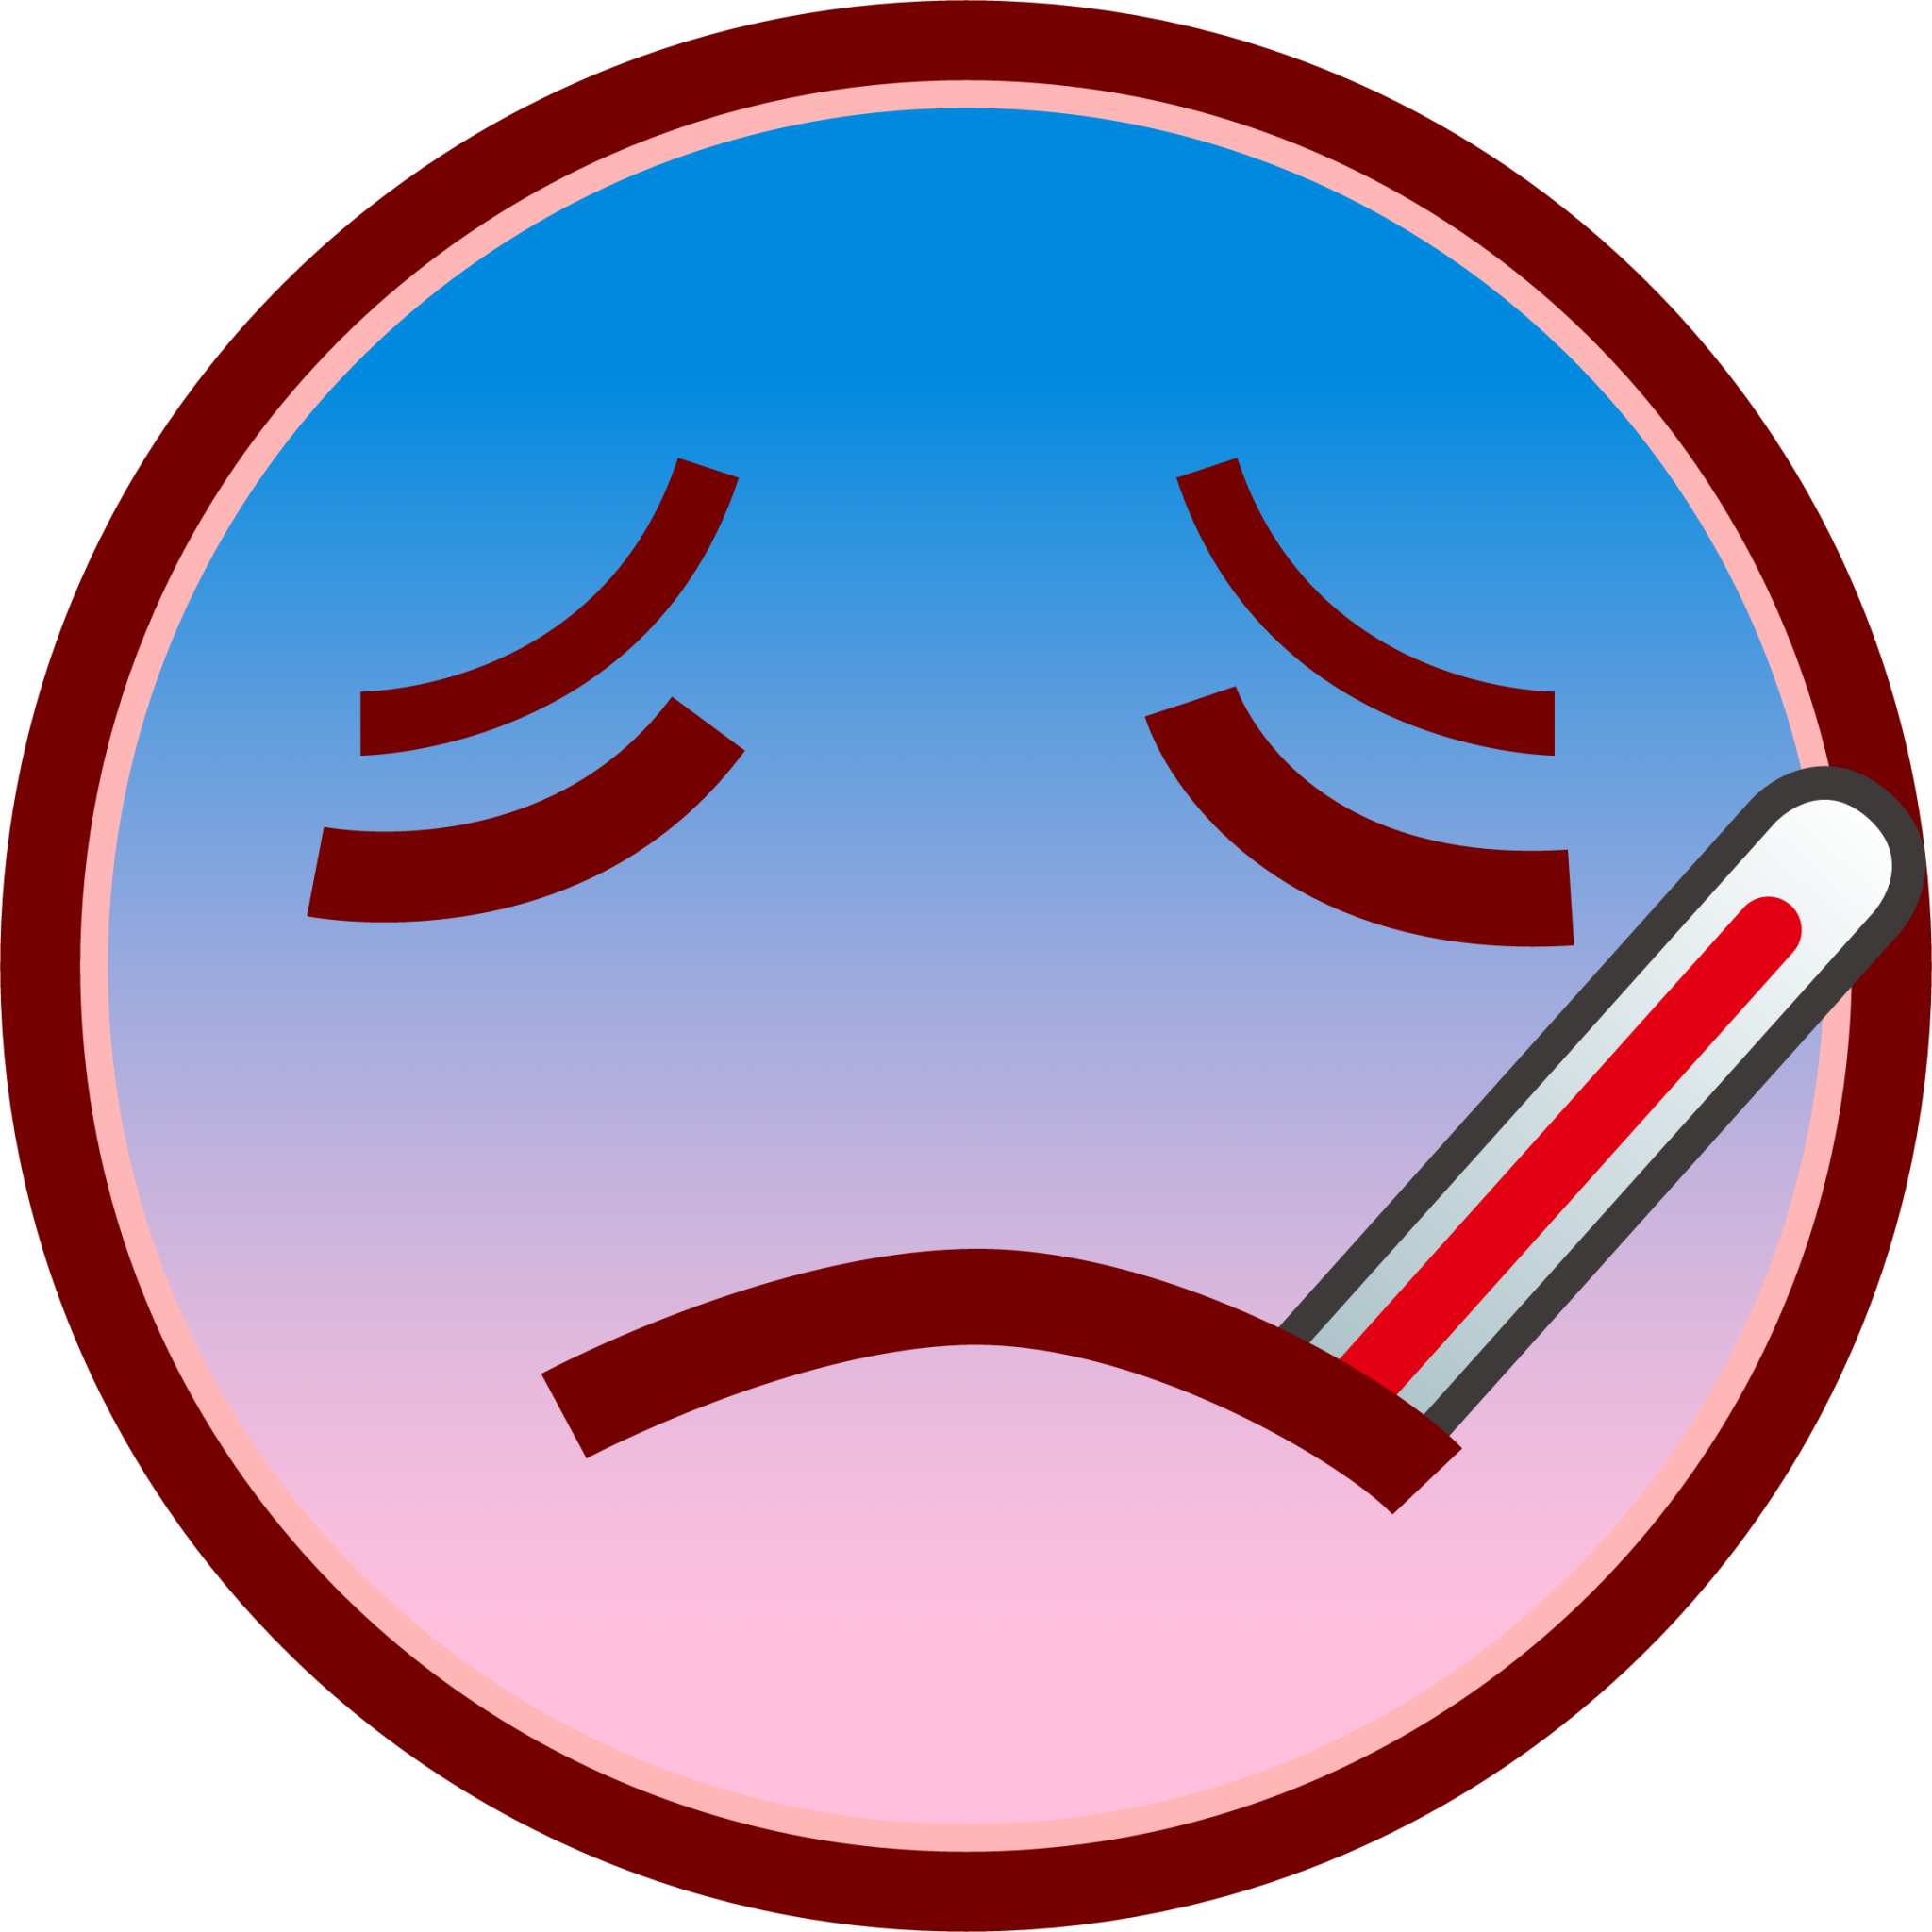 face with thermometer (white) emoji